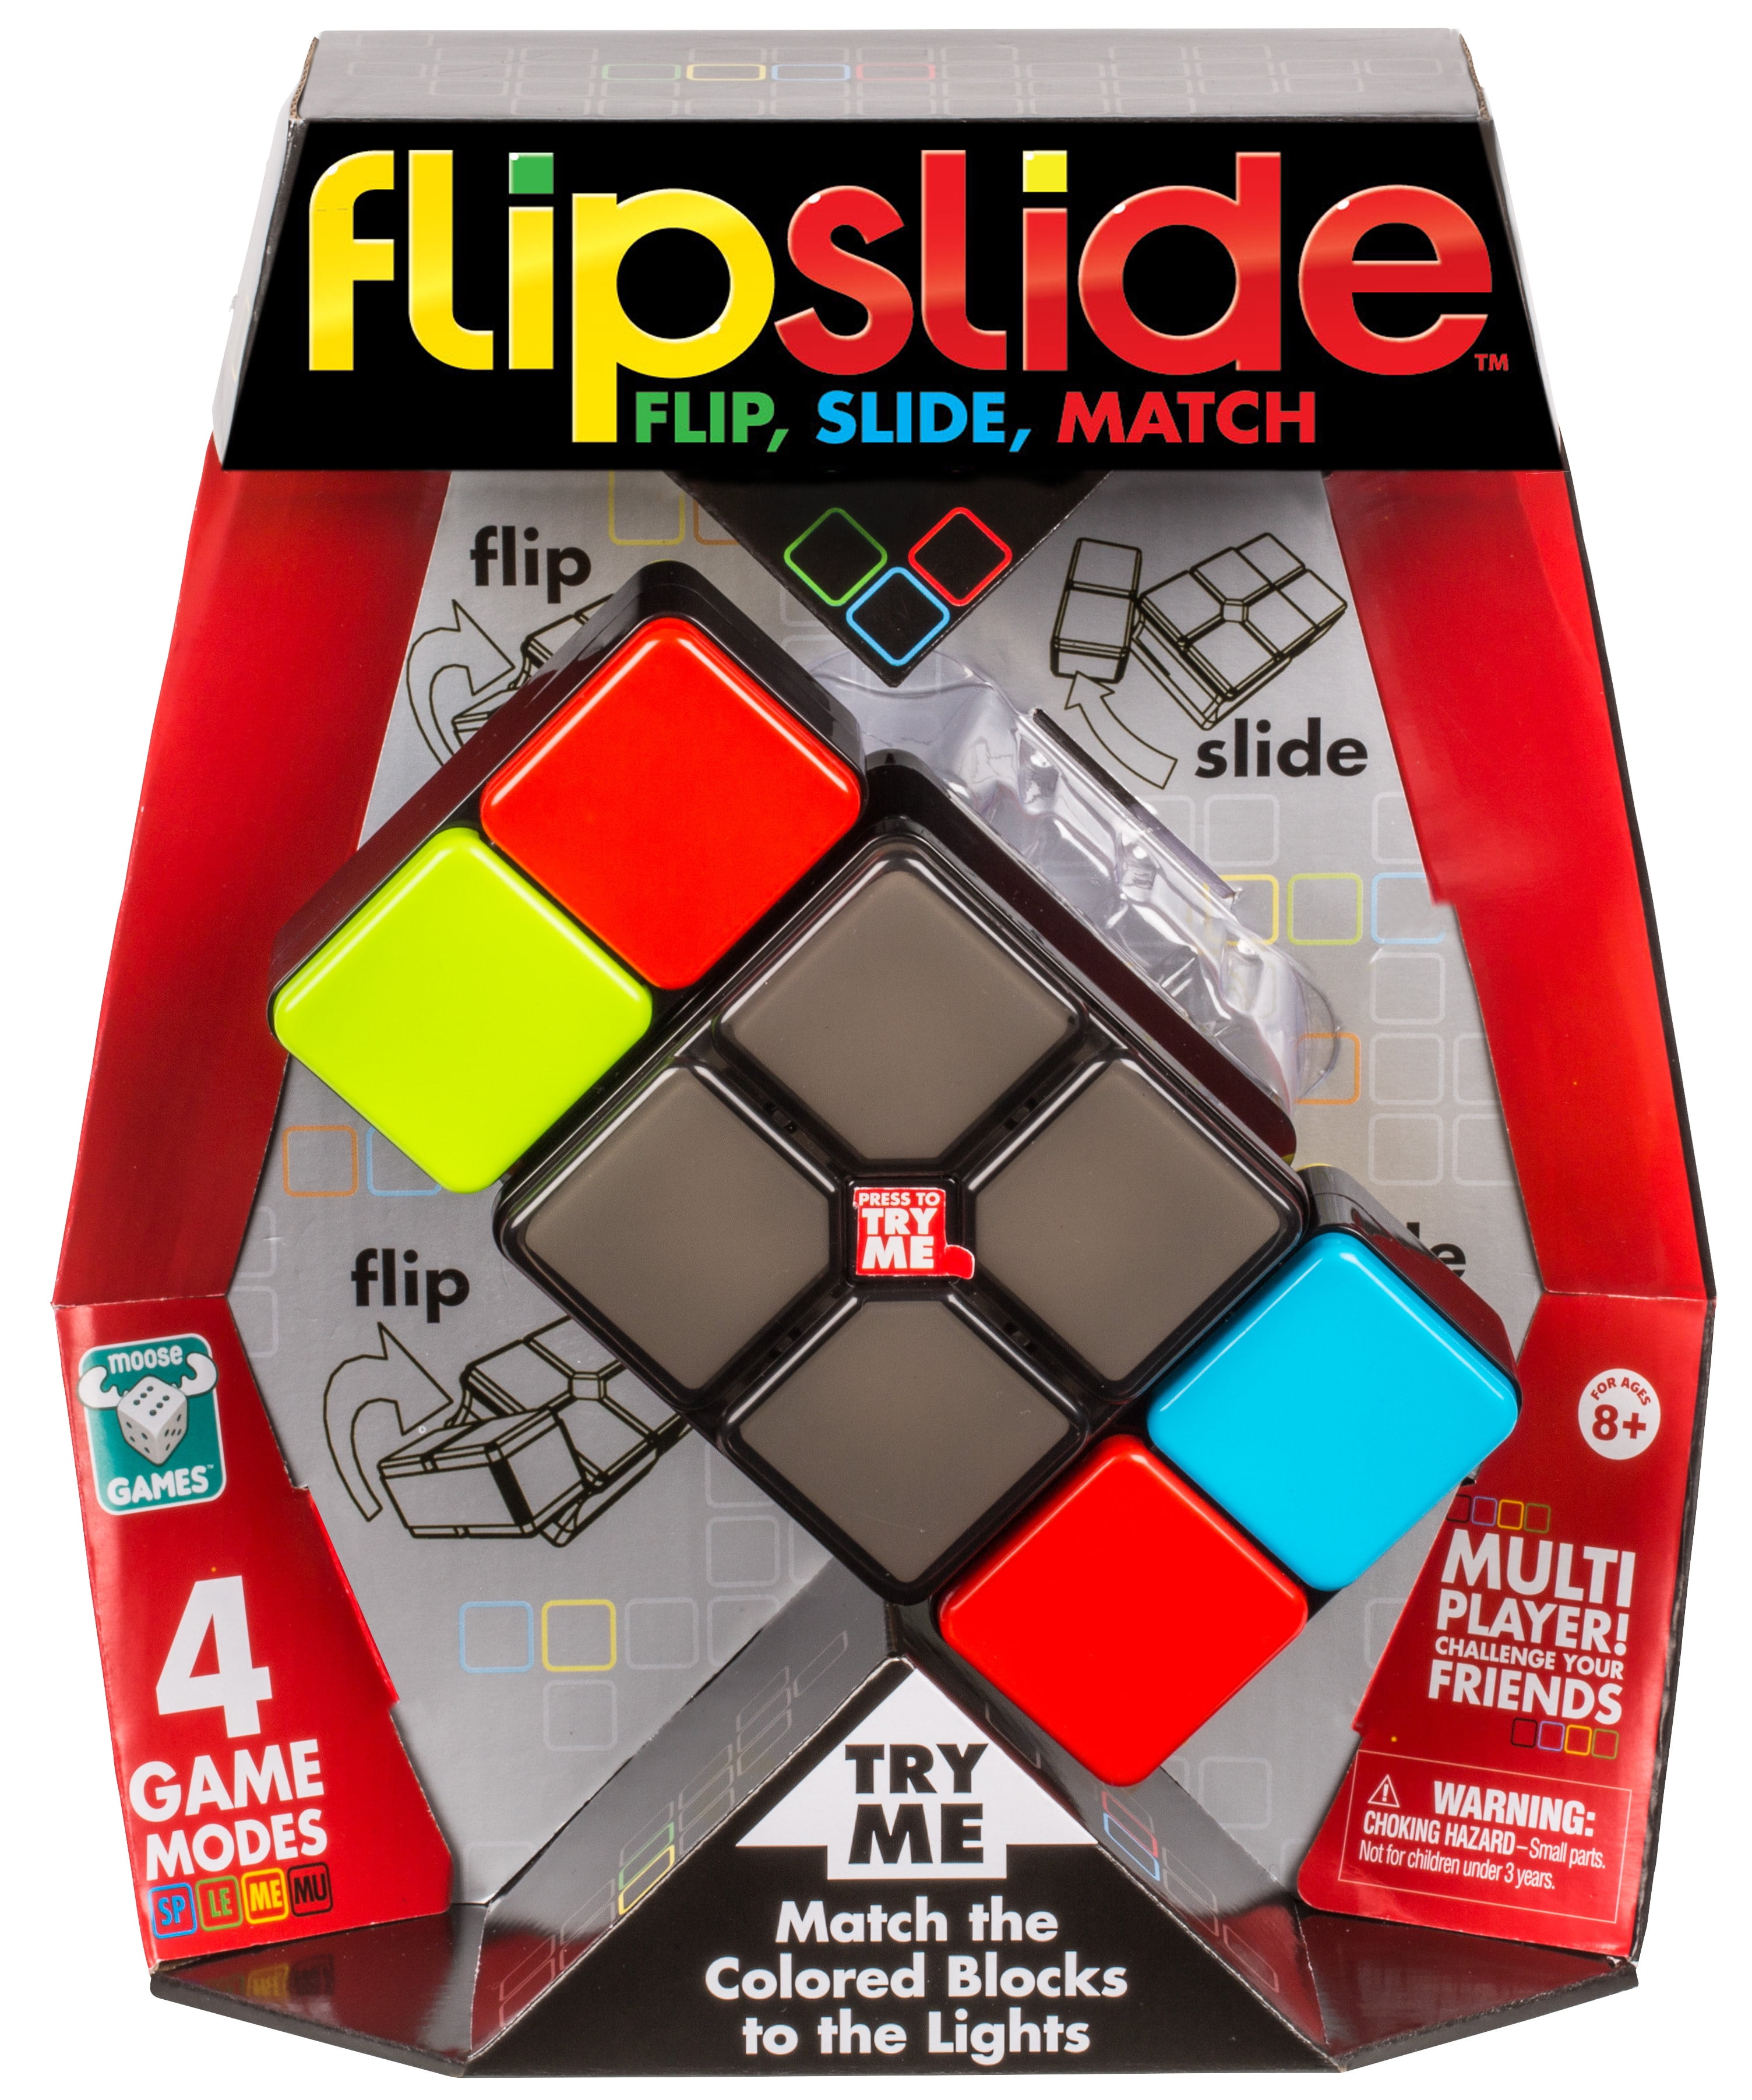  Flipslide Game - Electronic Handheld Game, Addictive  Multiplayer Puzzle Game of Skill, Flip, Slide & Match Colors to Beat the  Clock, 4 Thrilling Game Modes, Ages 8+